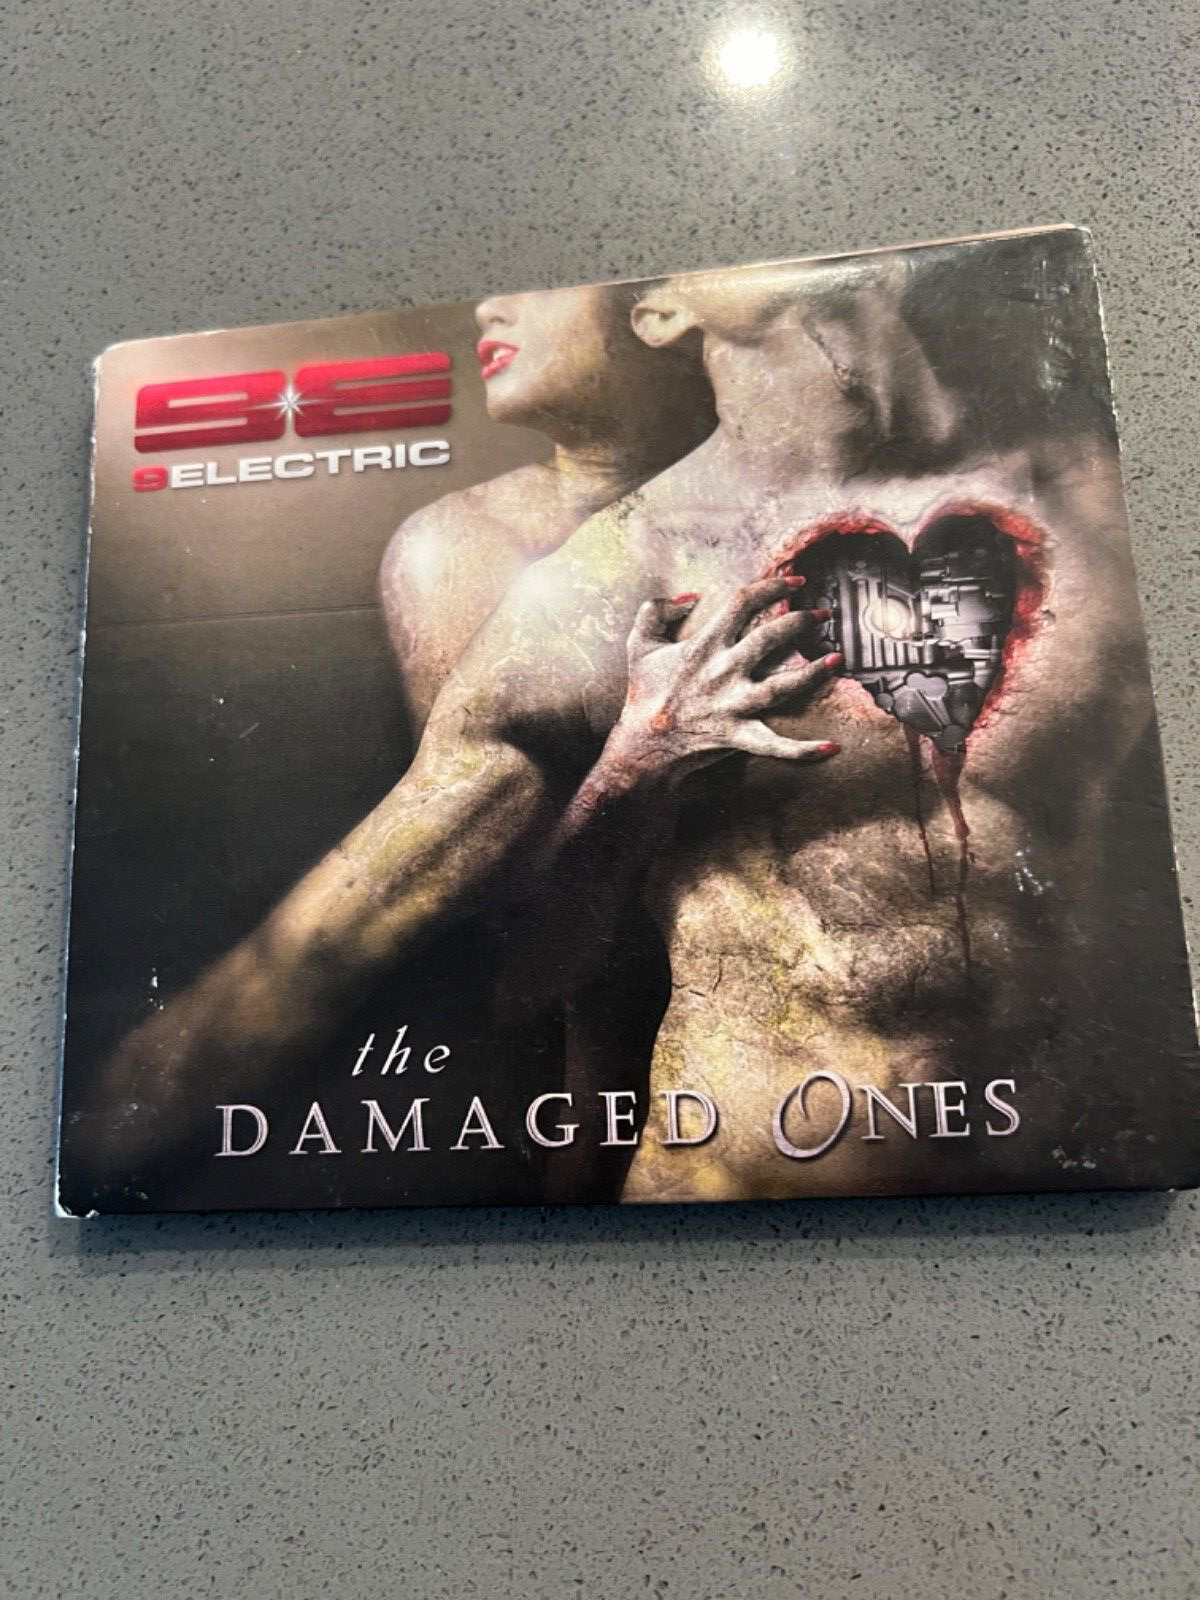 9Electric - The Damaged Ones -  CD Autographed by all